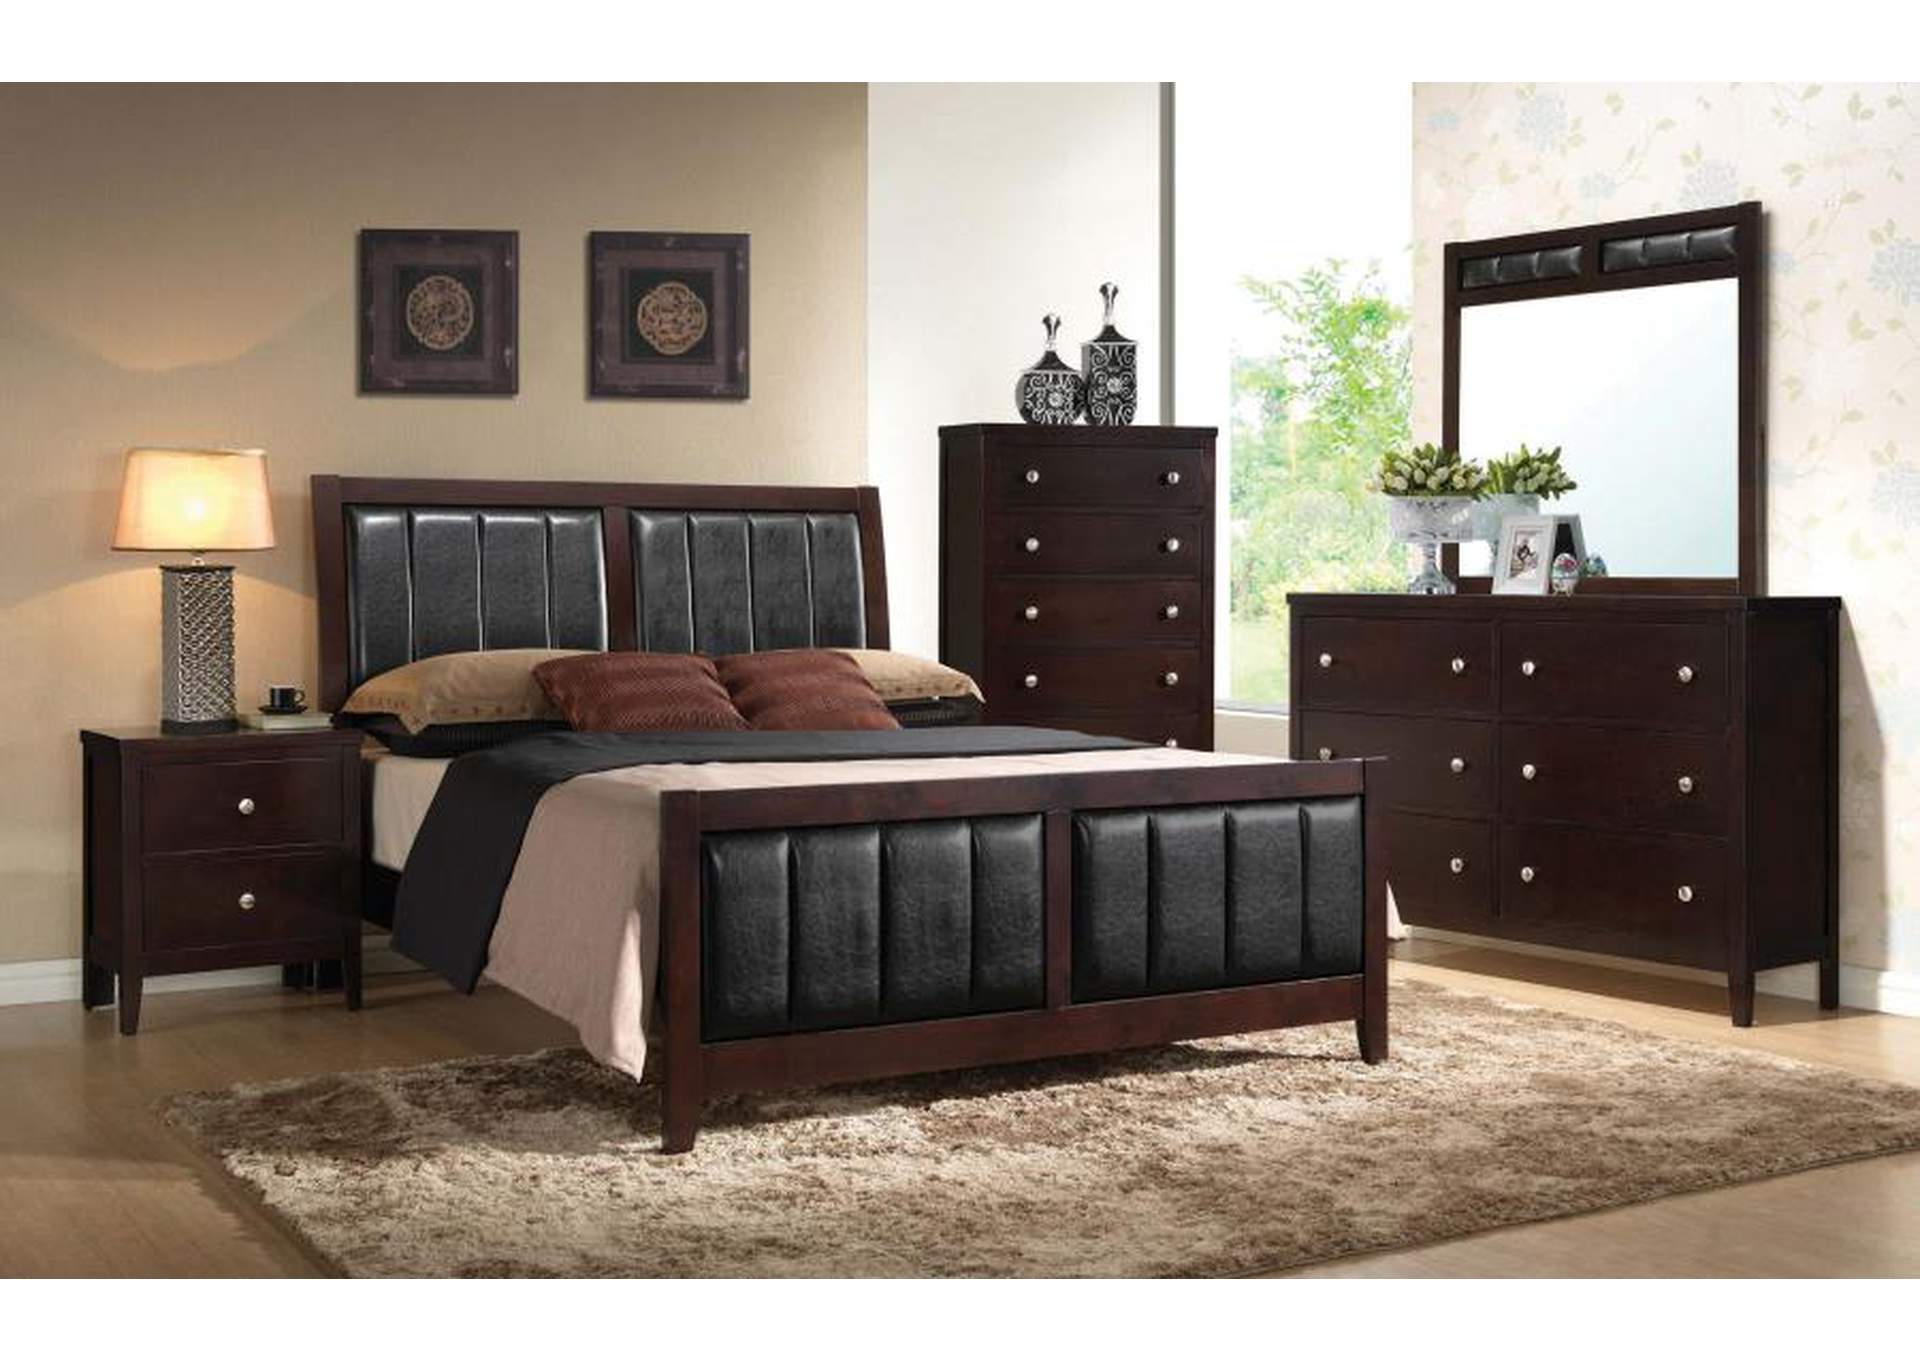 Carlton California King Upholstered Bed Cappuccino and Black,Coaster Furniture